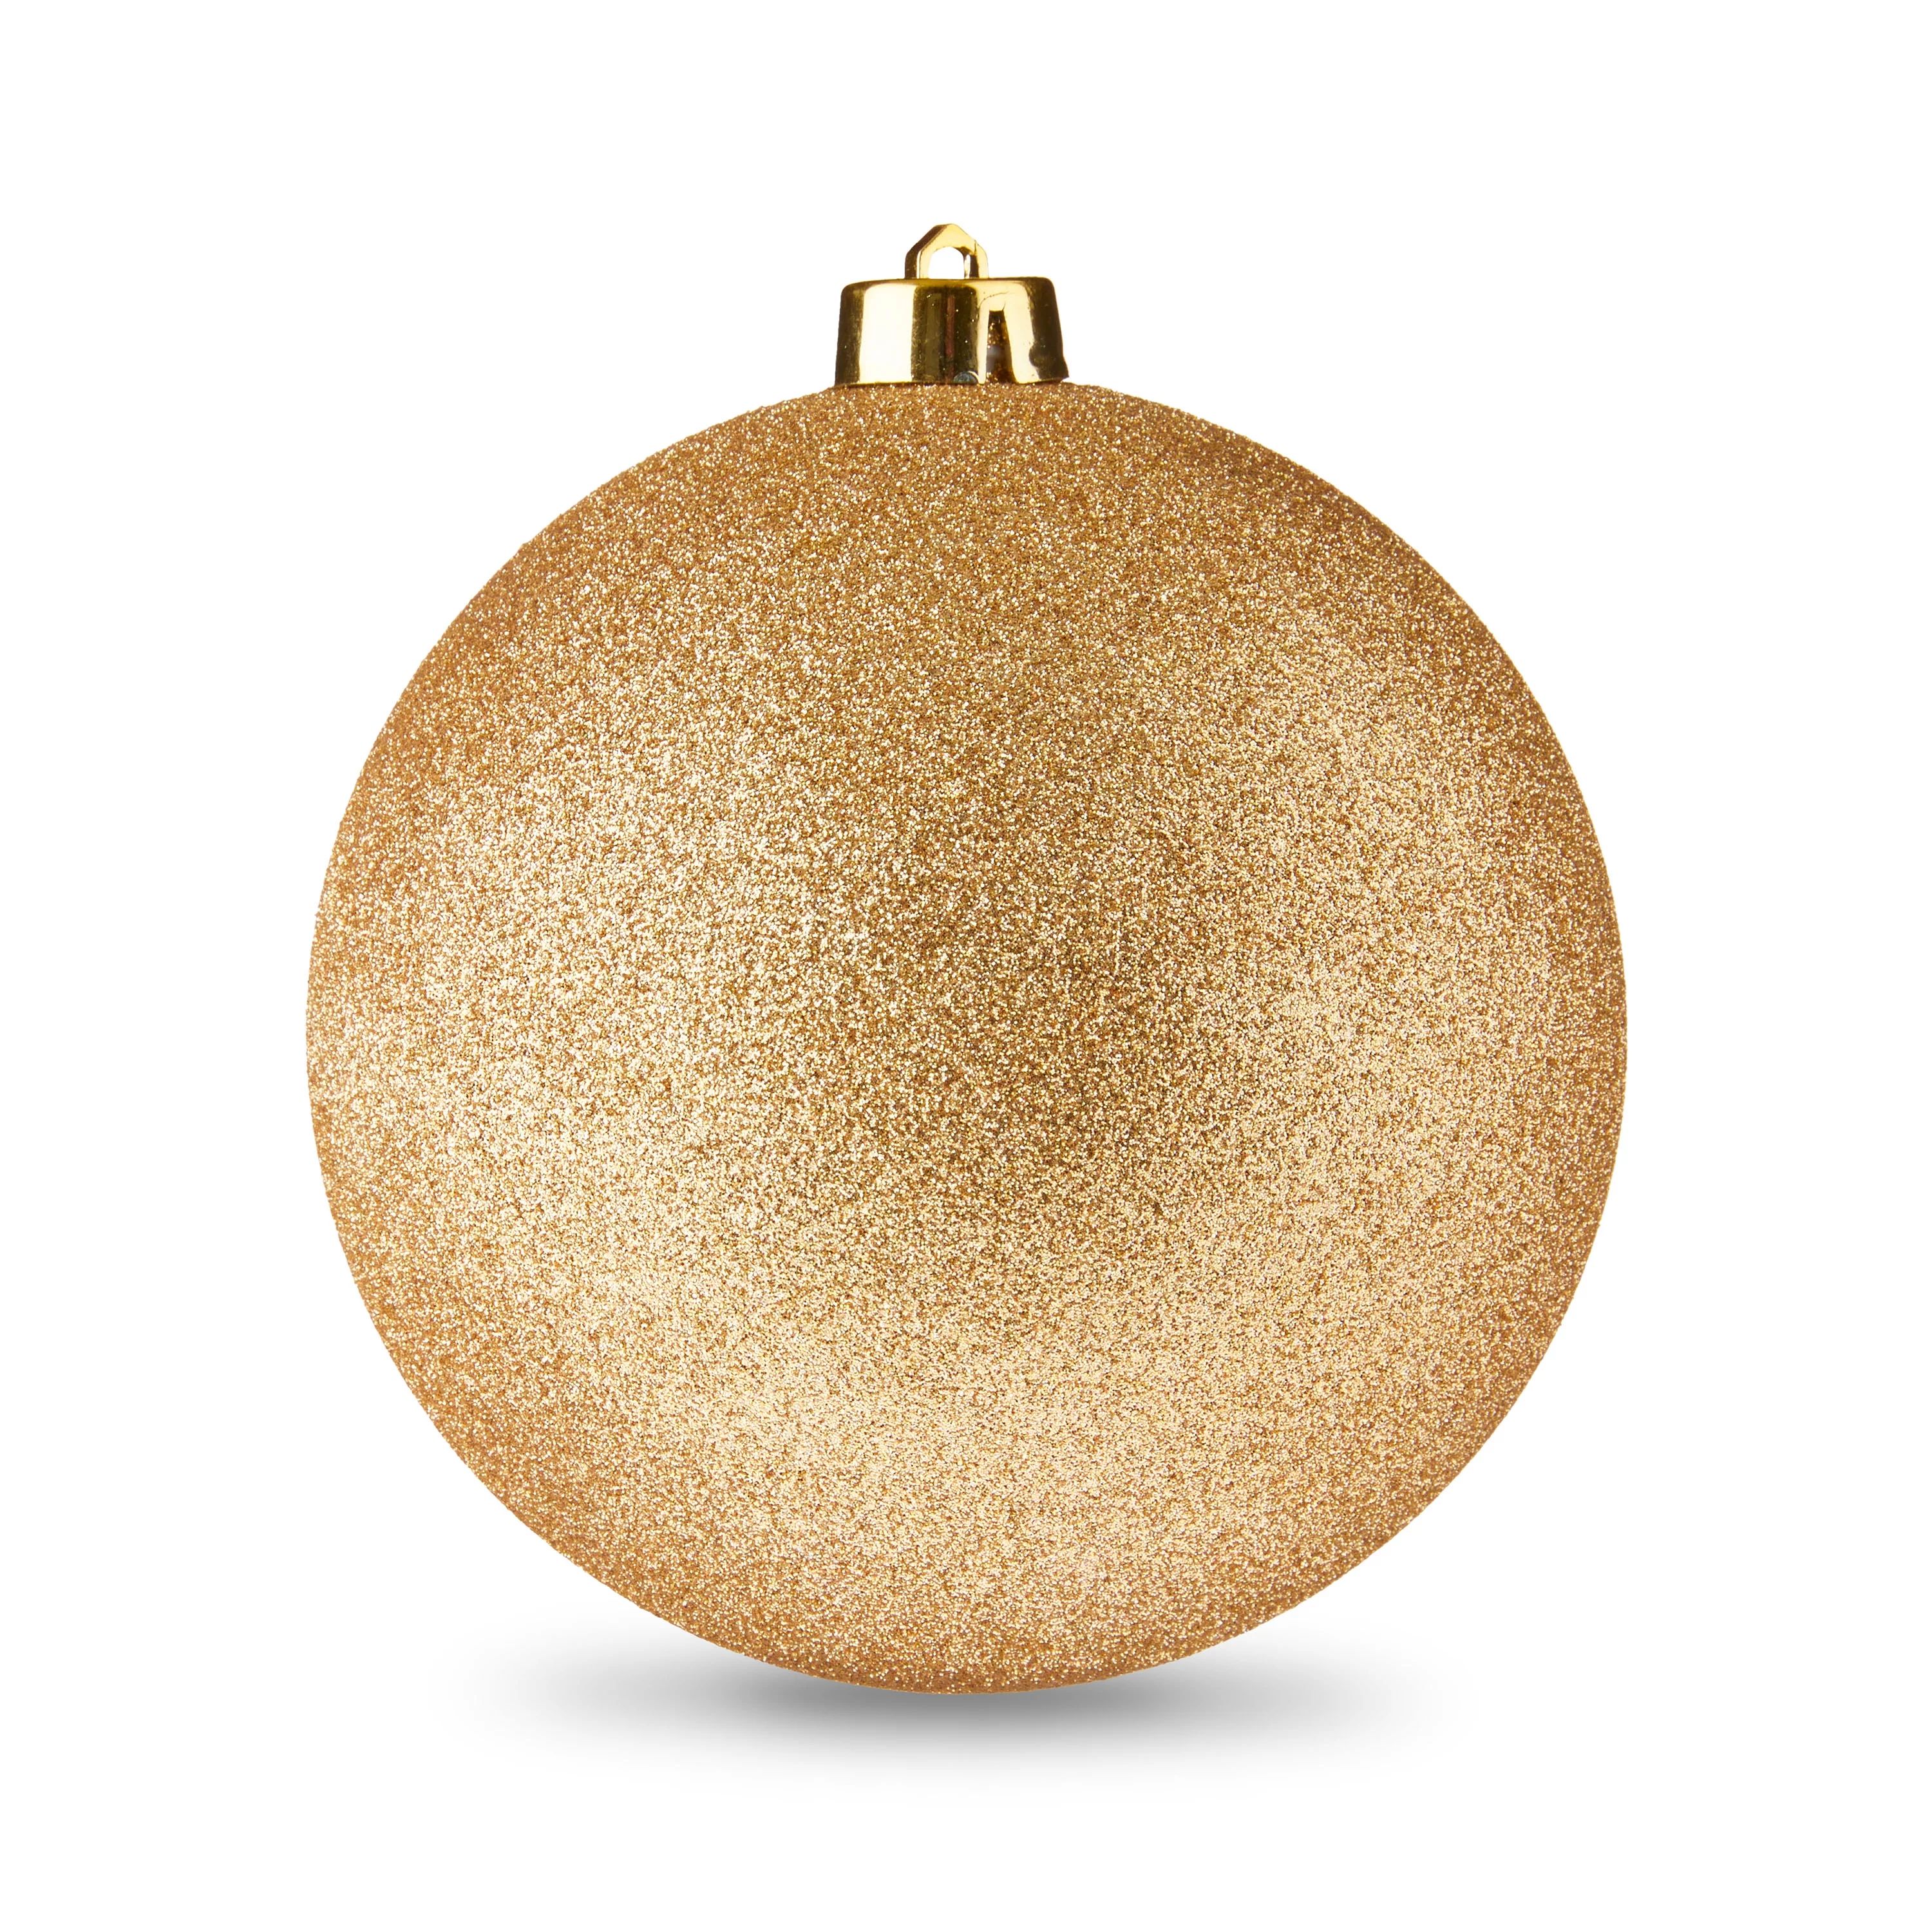 Gold Glitter 150mm Jumbo Shatterproof Round Christmas Ornament, by Holiday Time | Walmart (US)